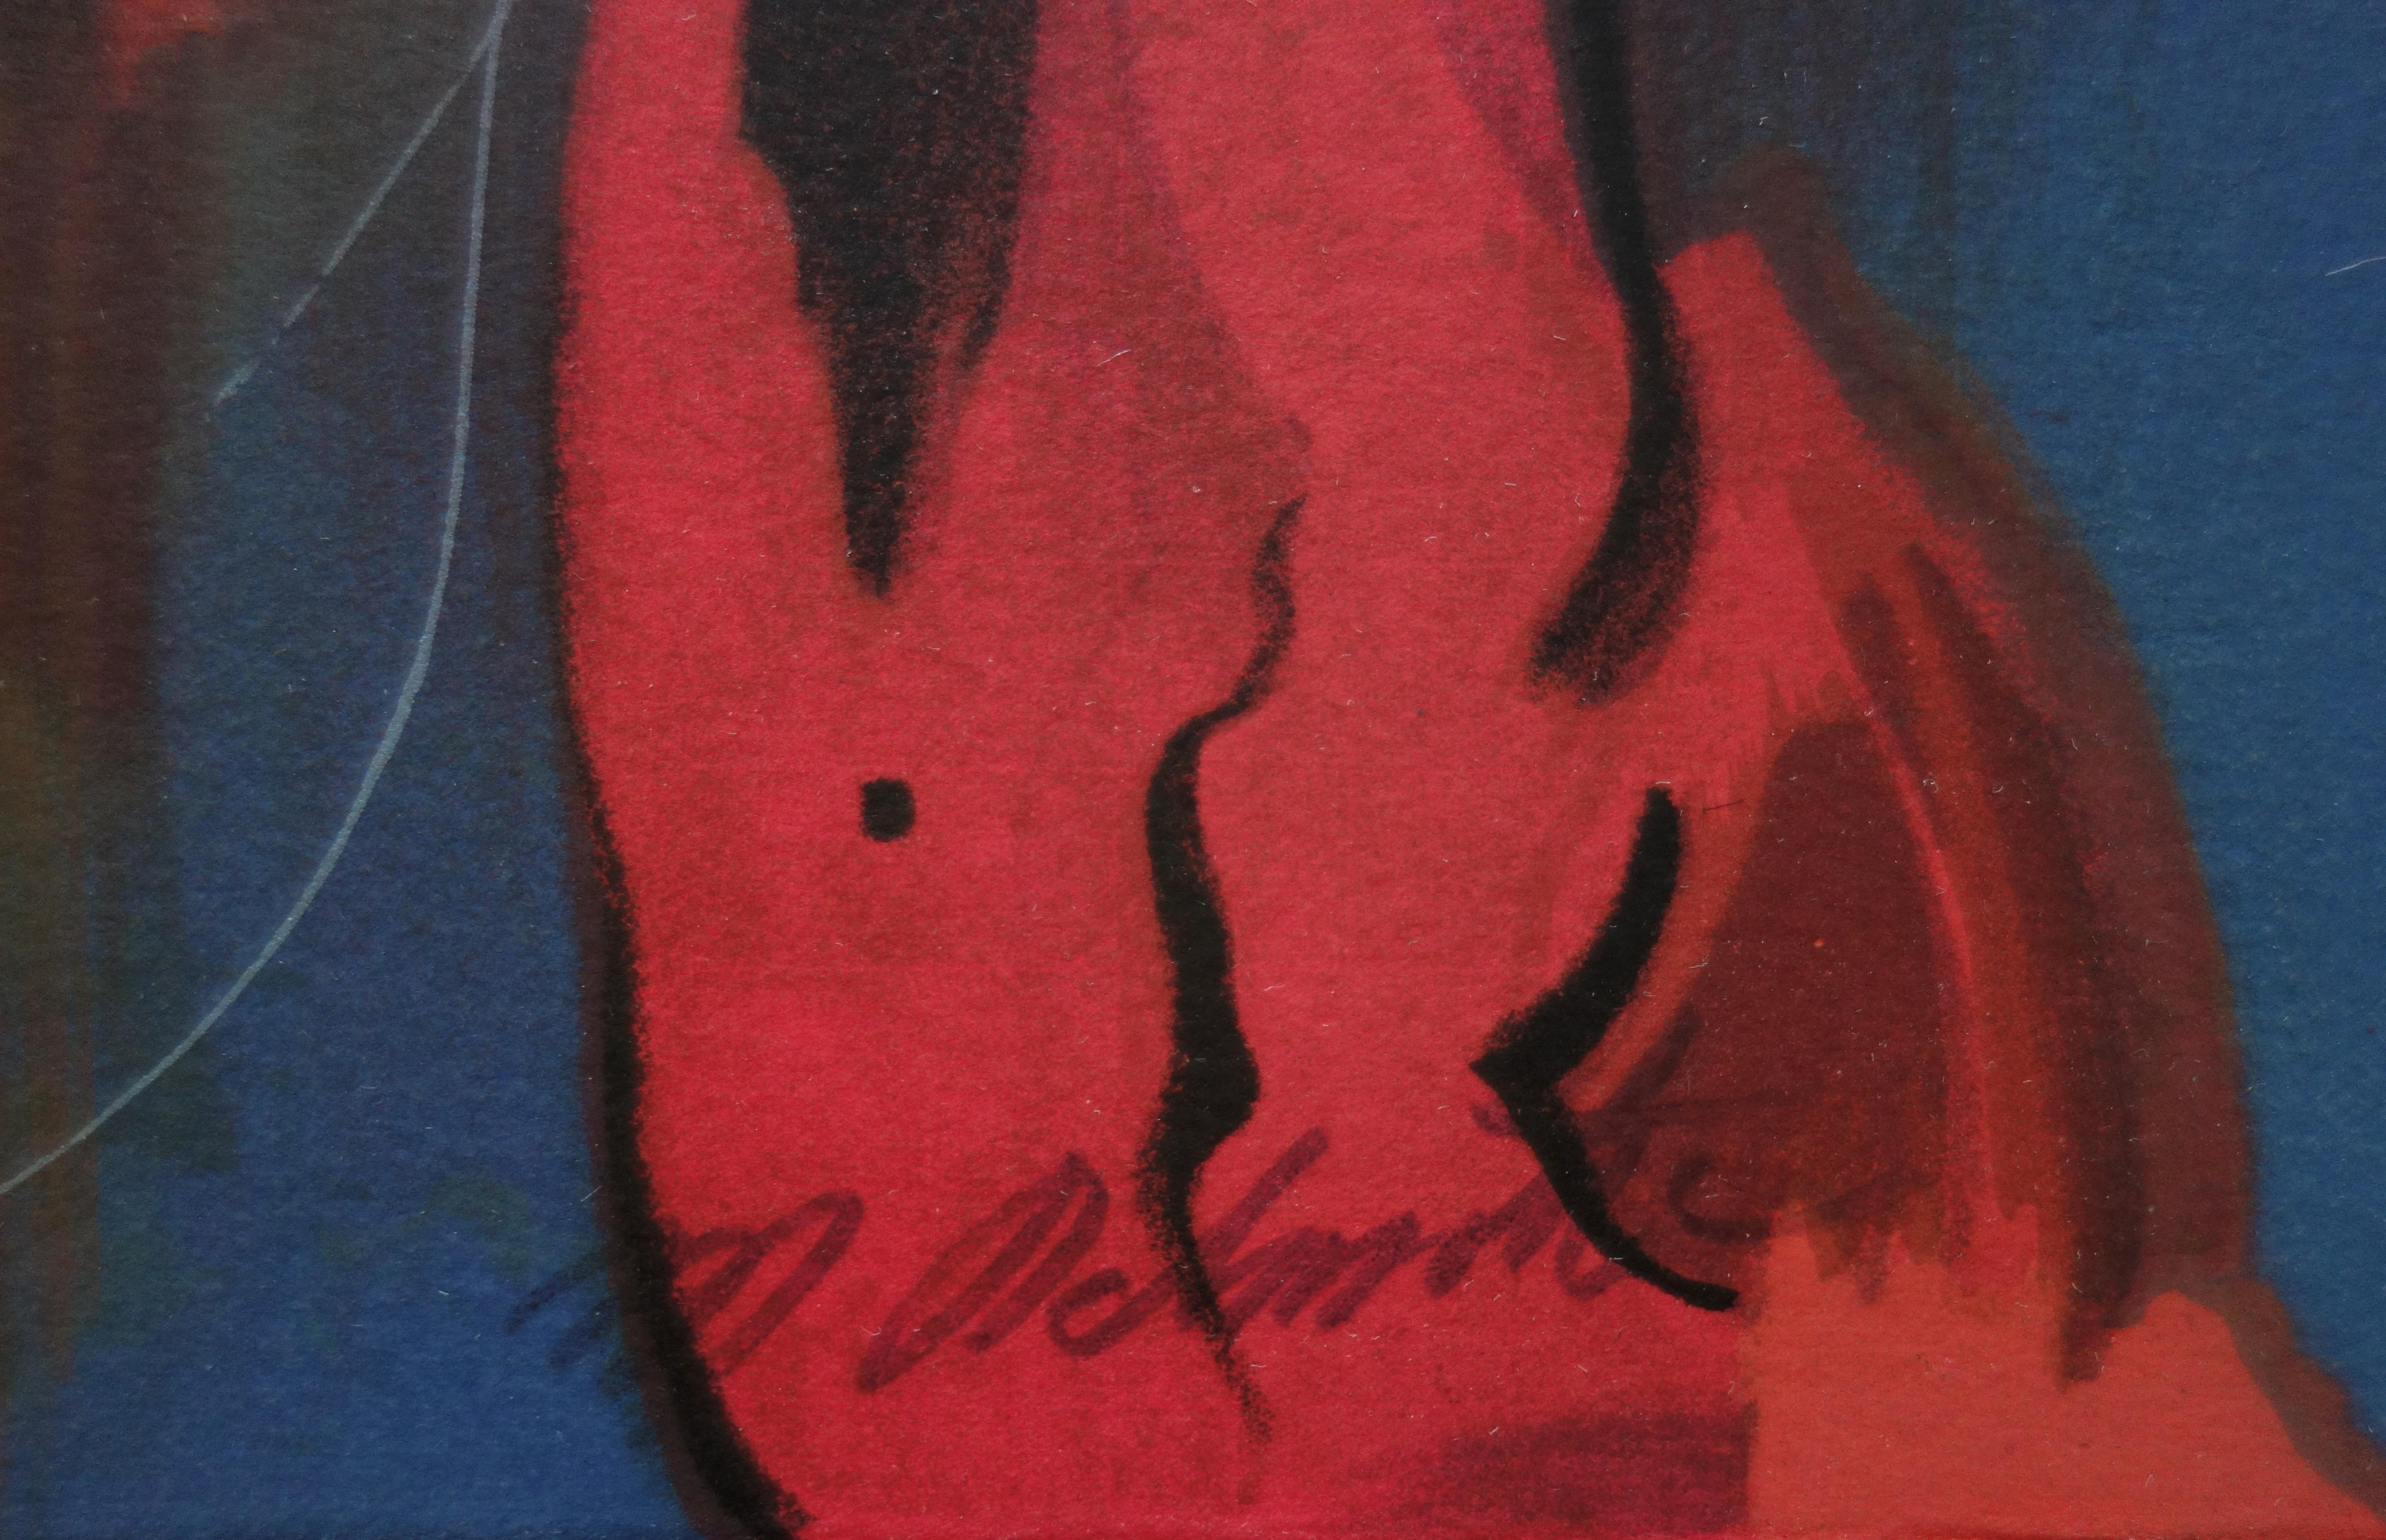 Woman in Fire - Original handsigned lithograph - Modern Print by Marcel DELMOTTE